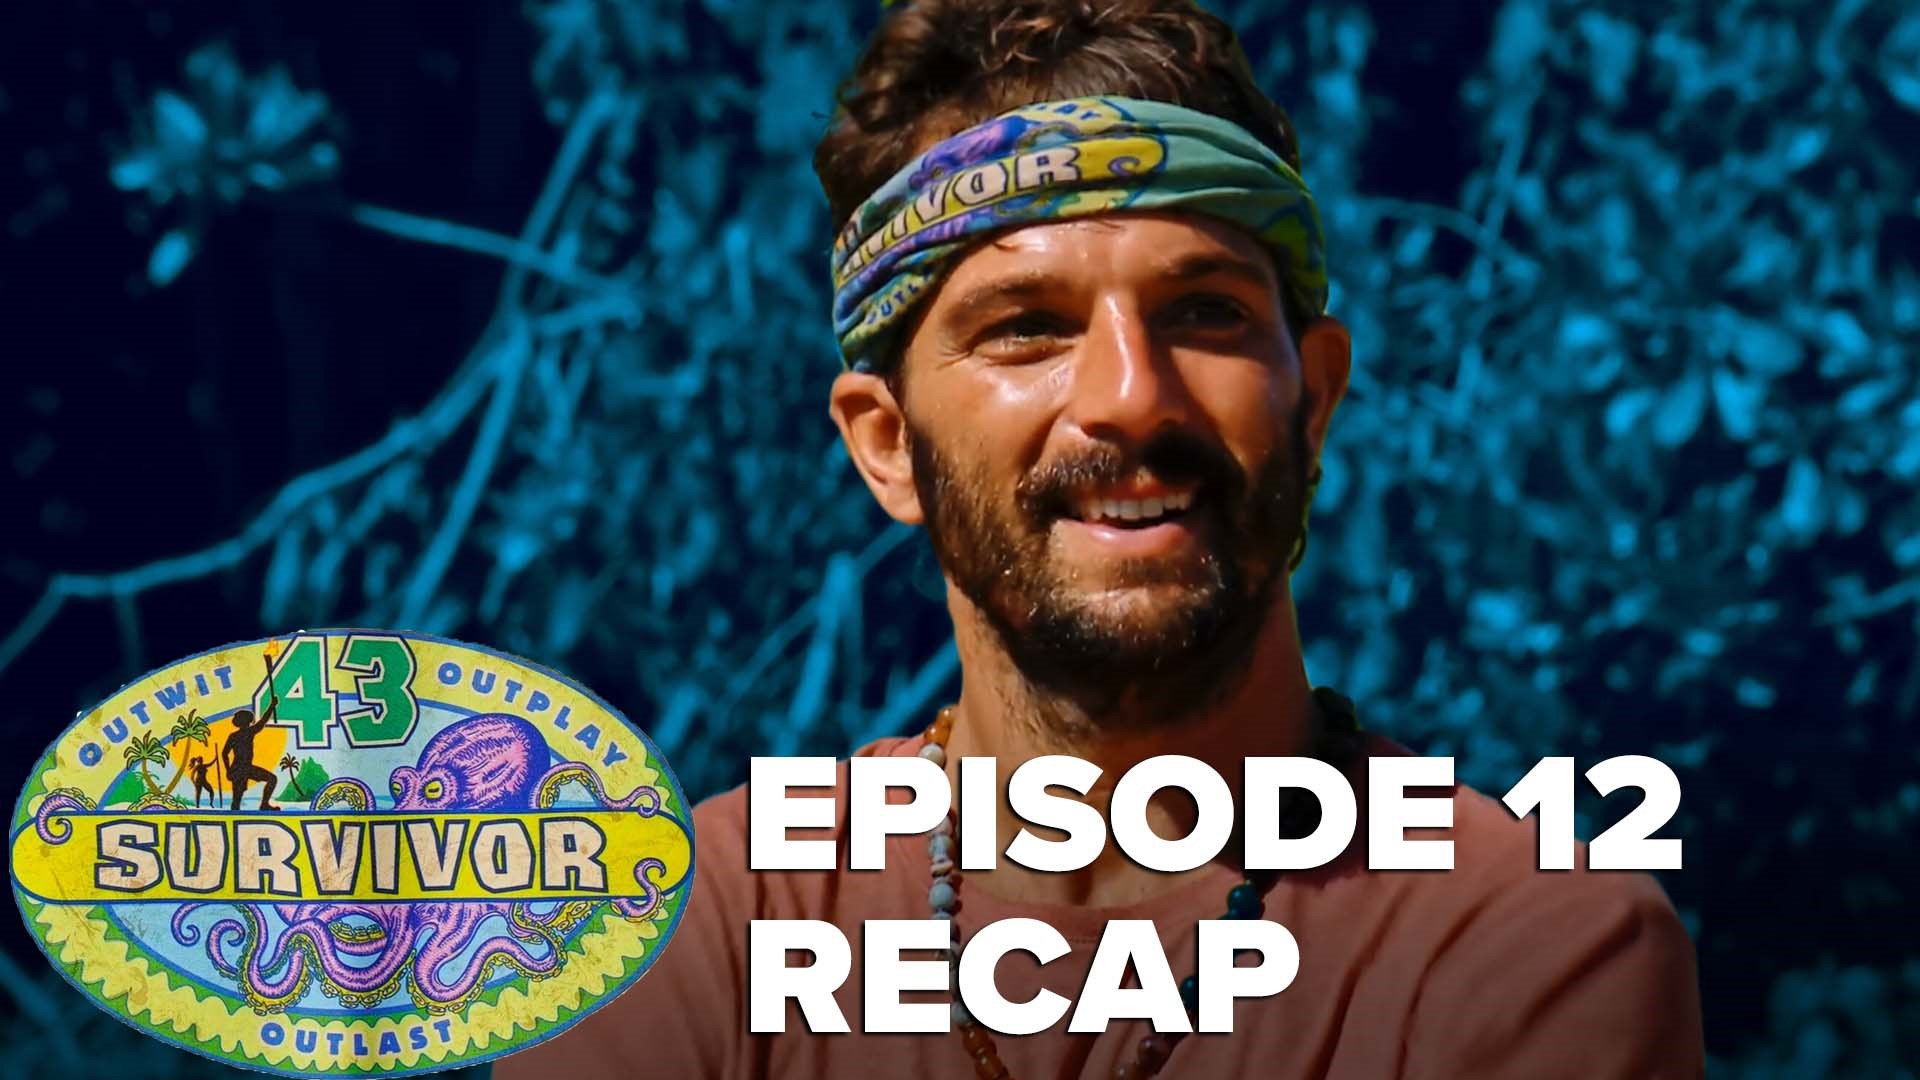 While not as ruthless as Boston Rob, one player makes the boldest and sharpest blindsides in Survivor history.